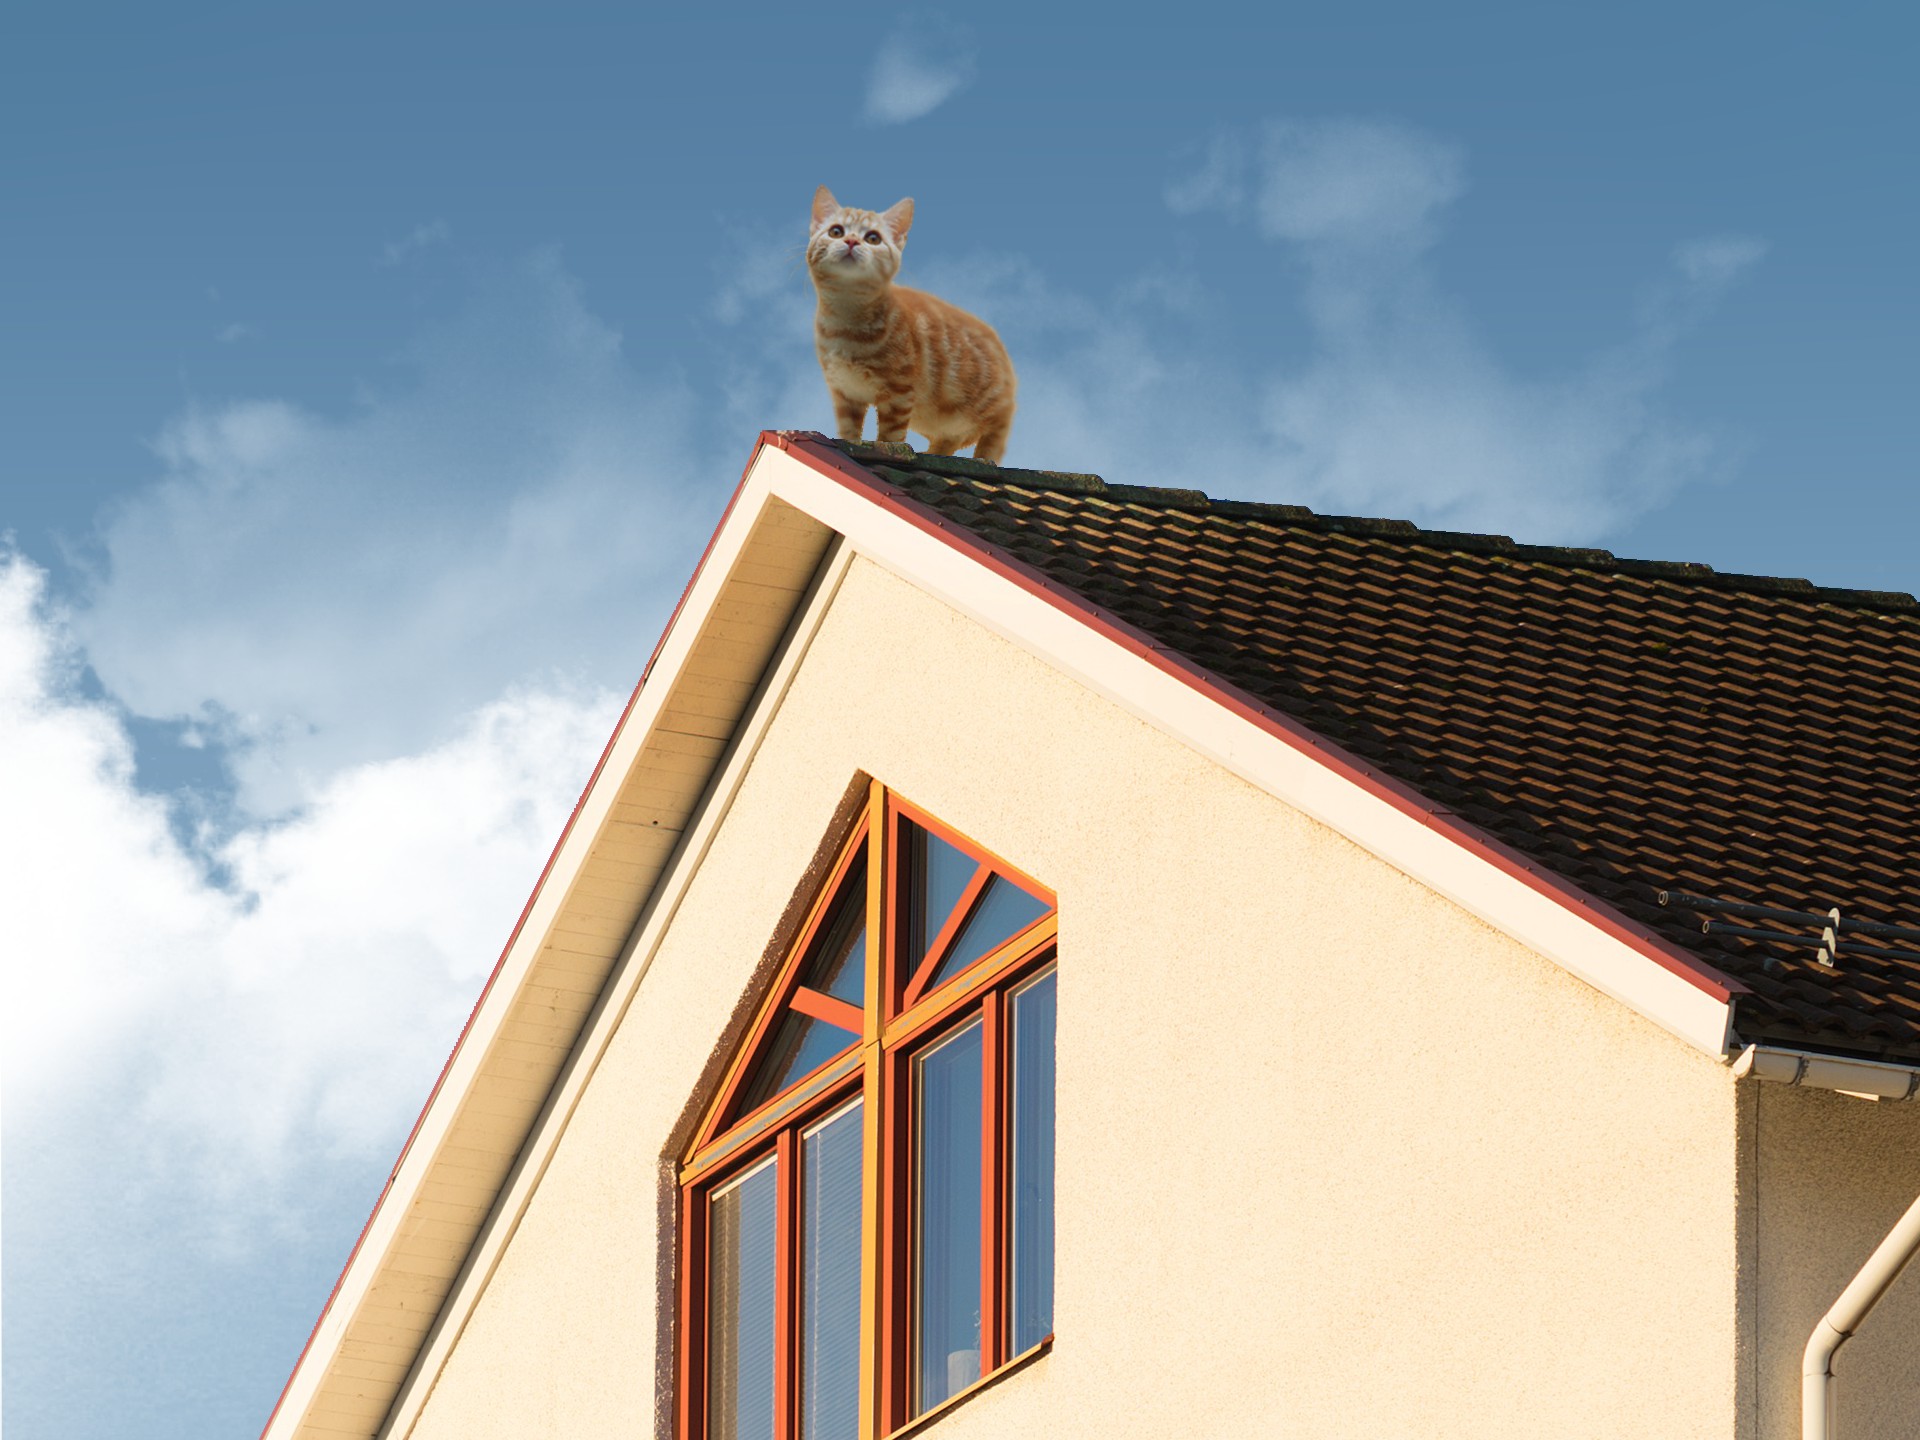 cat, Rooftops, Sky, House, Clouds Wallpaper